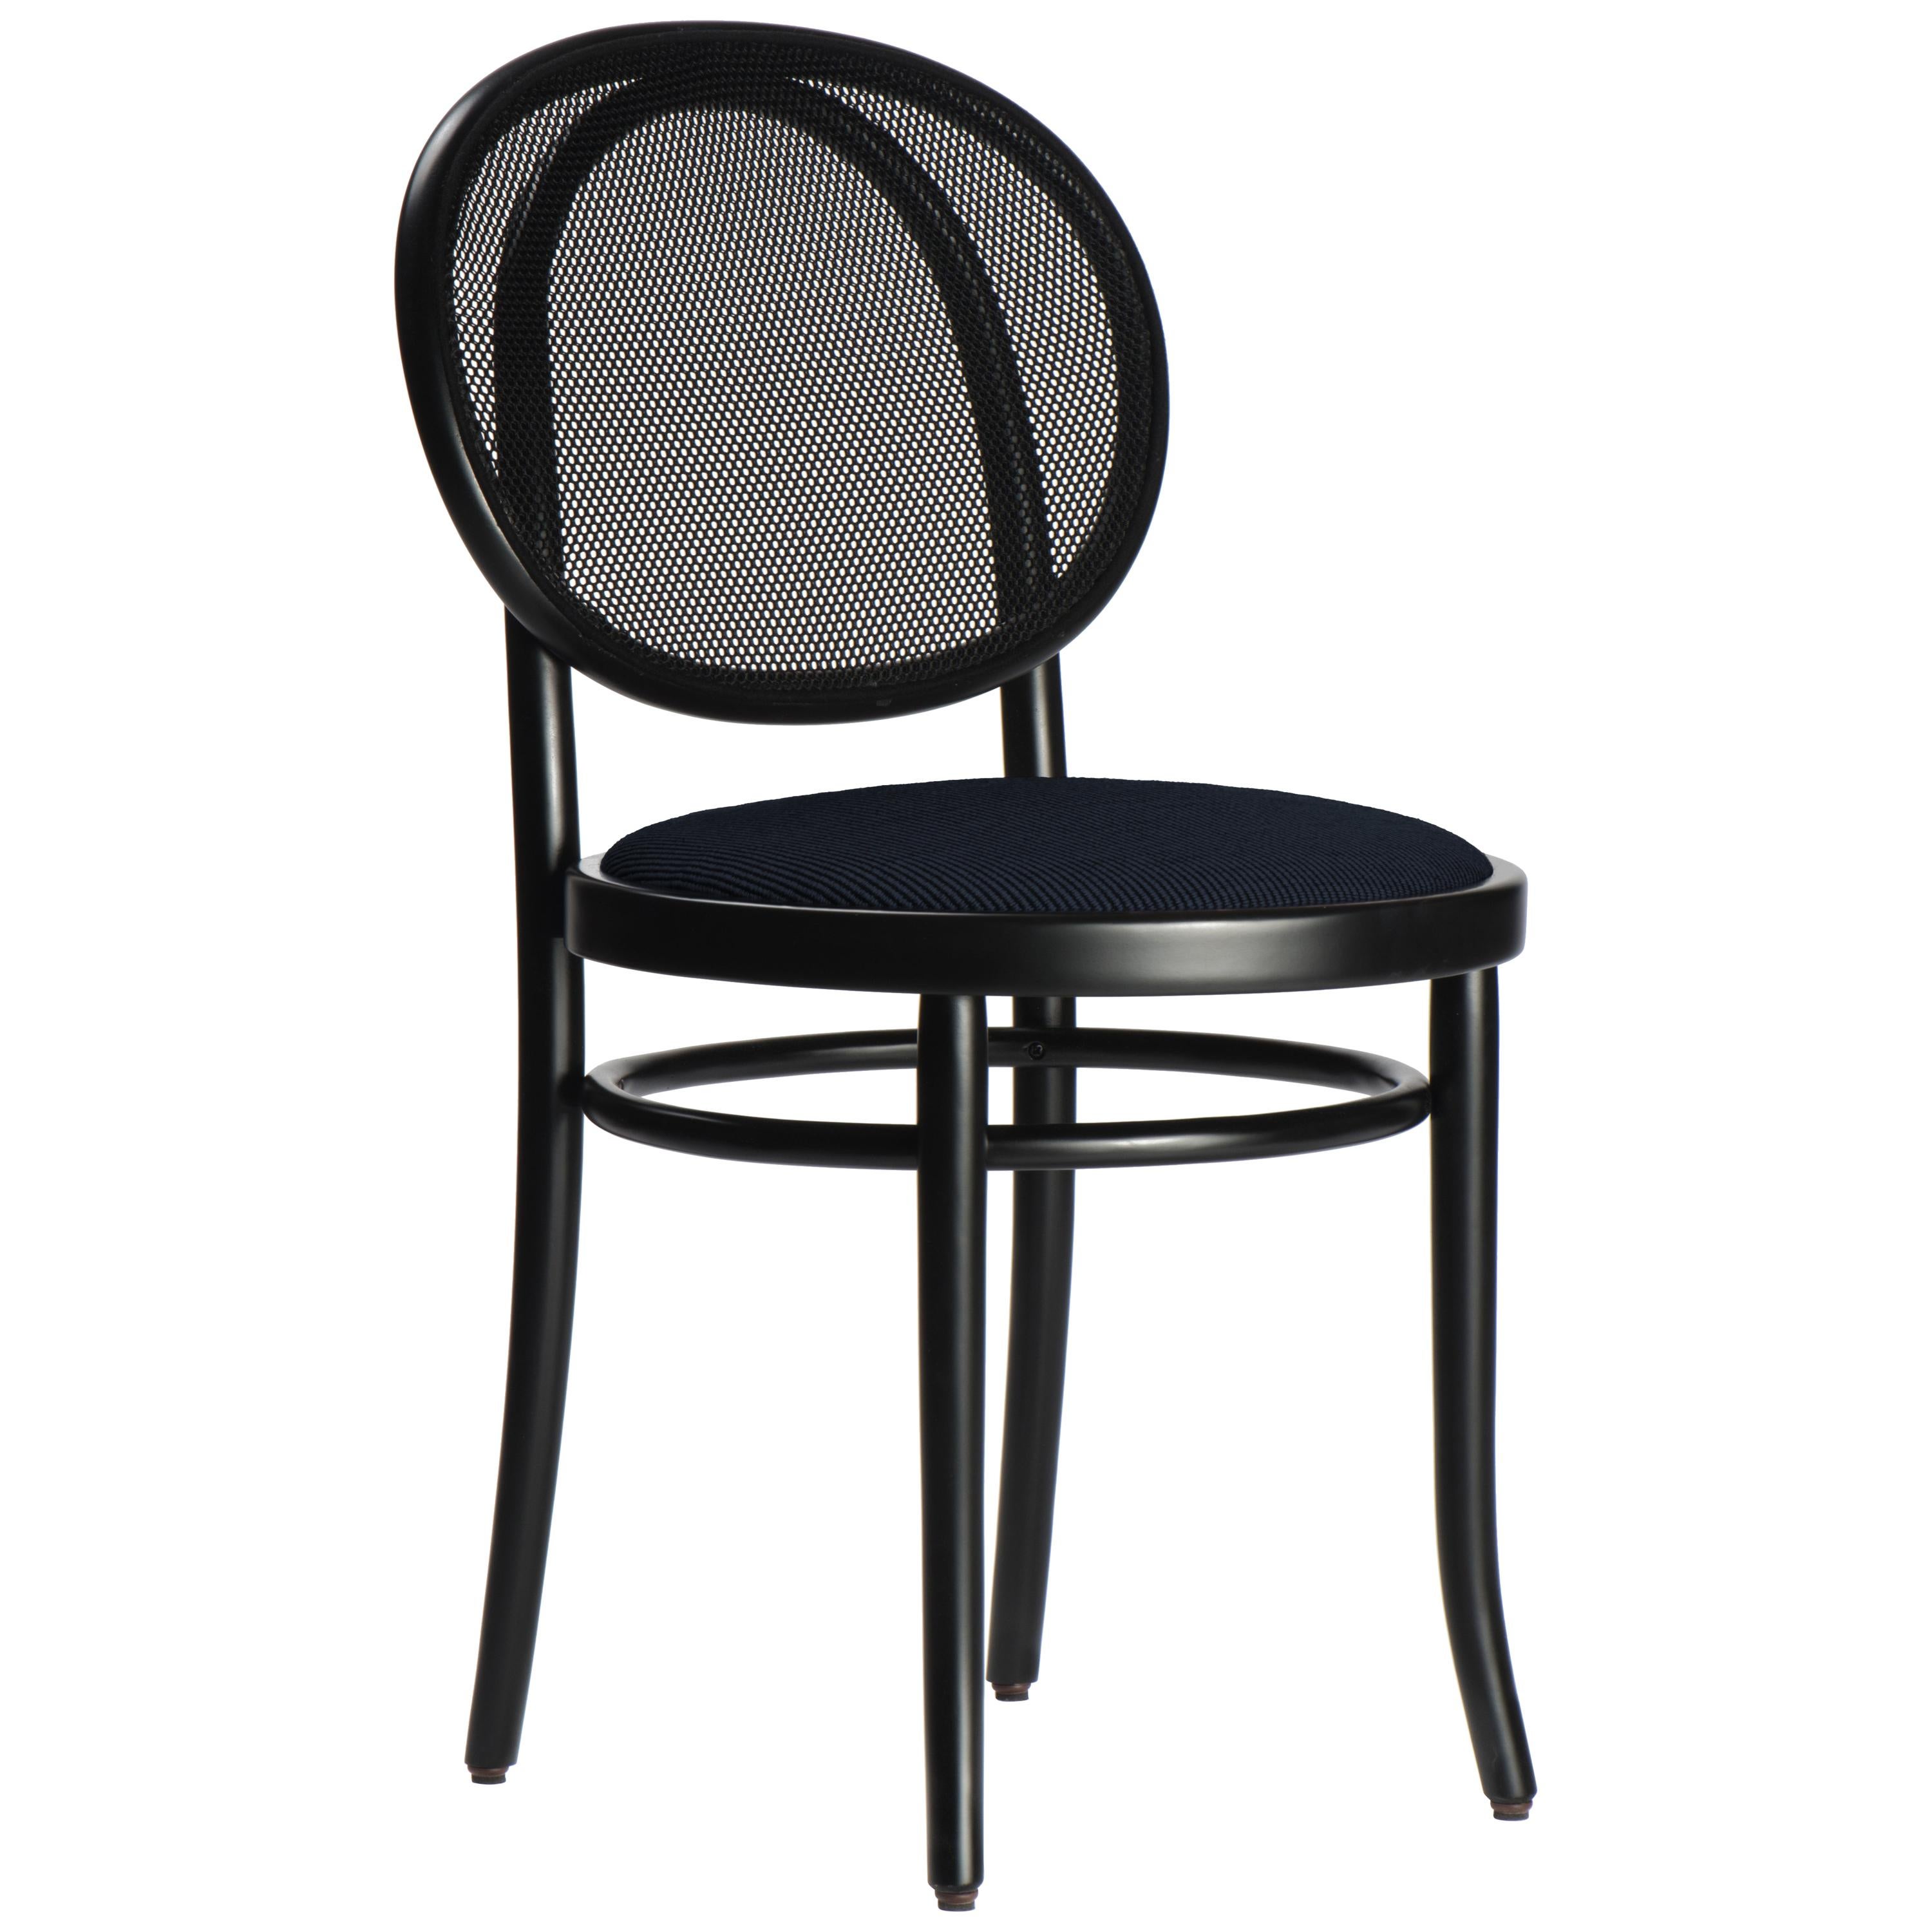 Gebrüder Thonet Vienna GmbH N.0 Black Chair with Mesh & Upholstered Seat For Sale